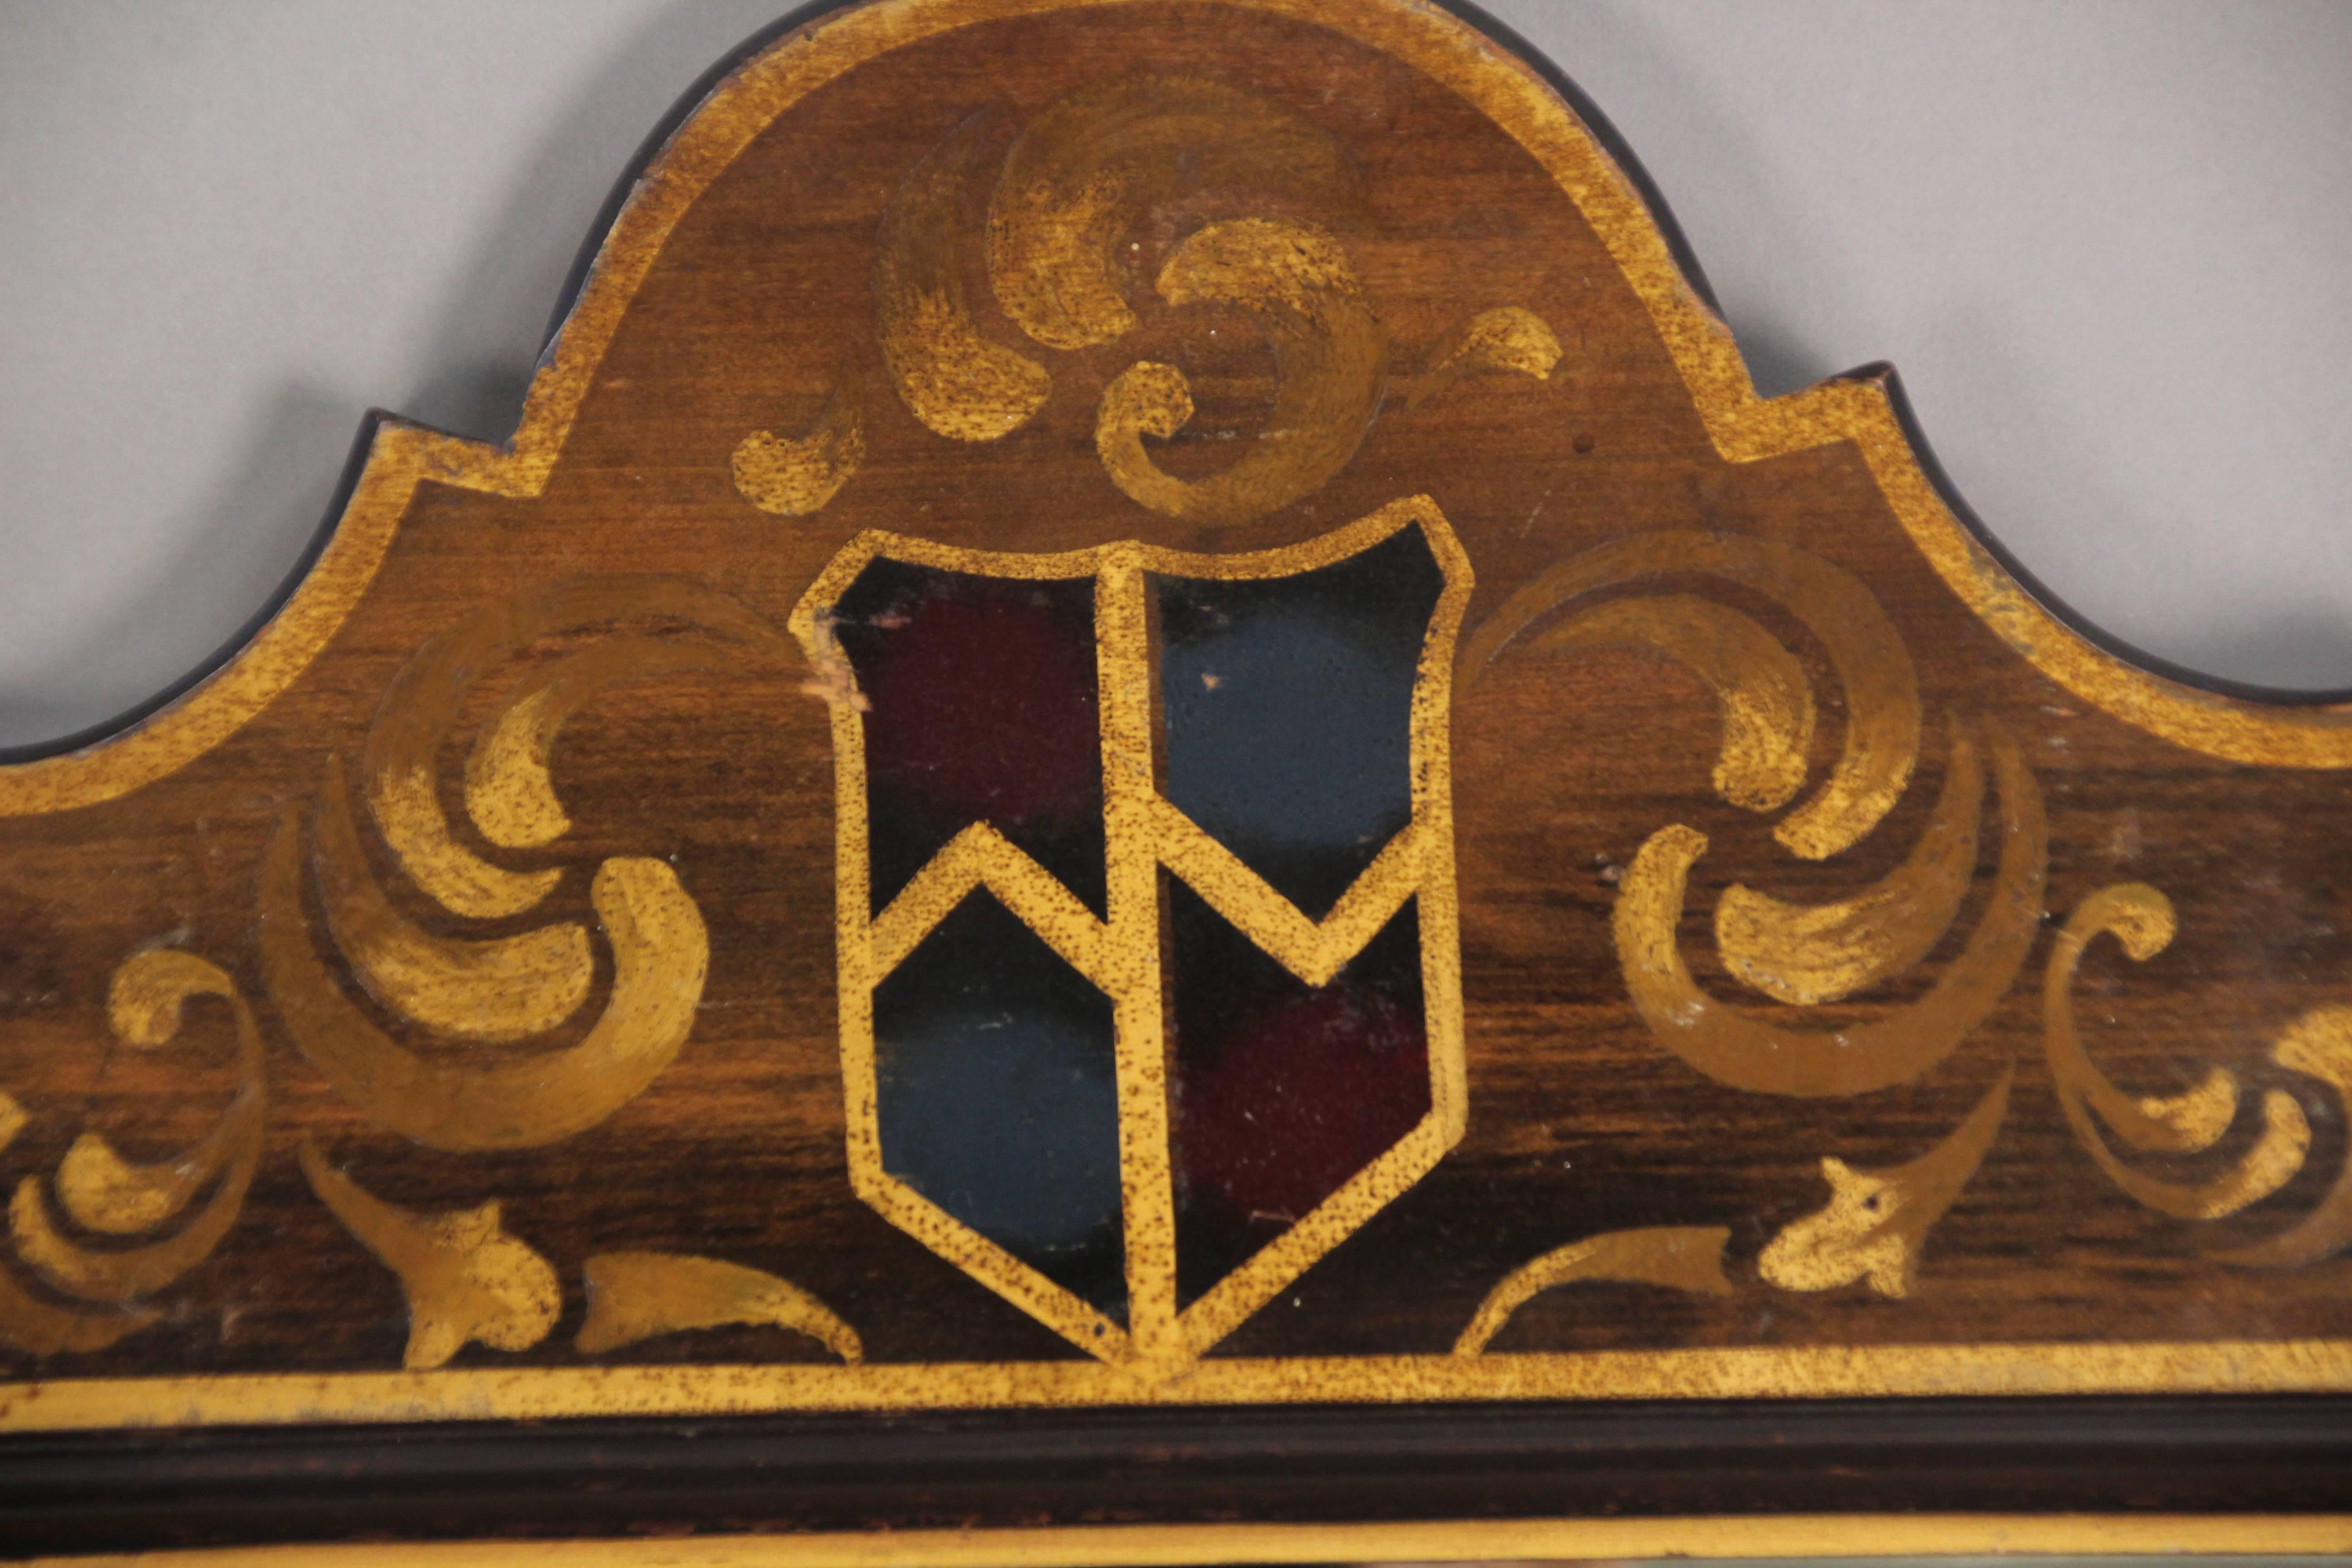 Hand-painted mirror with crest, circa 1920s. This piece came from local Los Angeles estate.